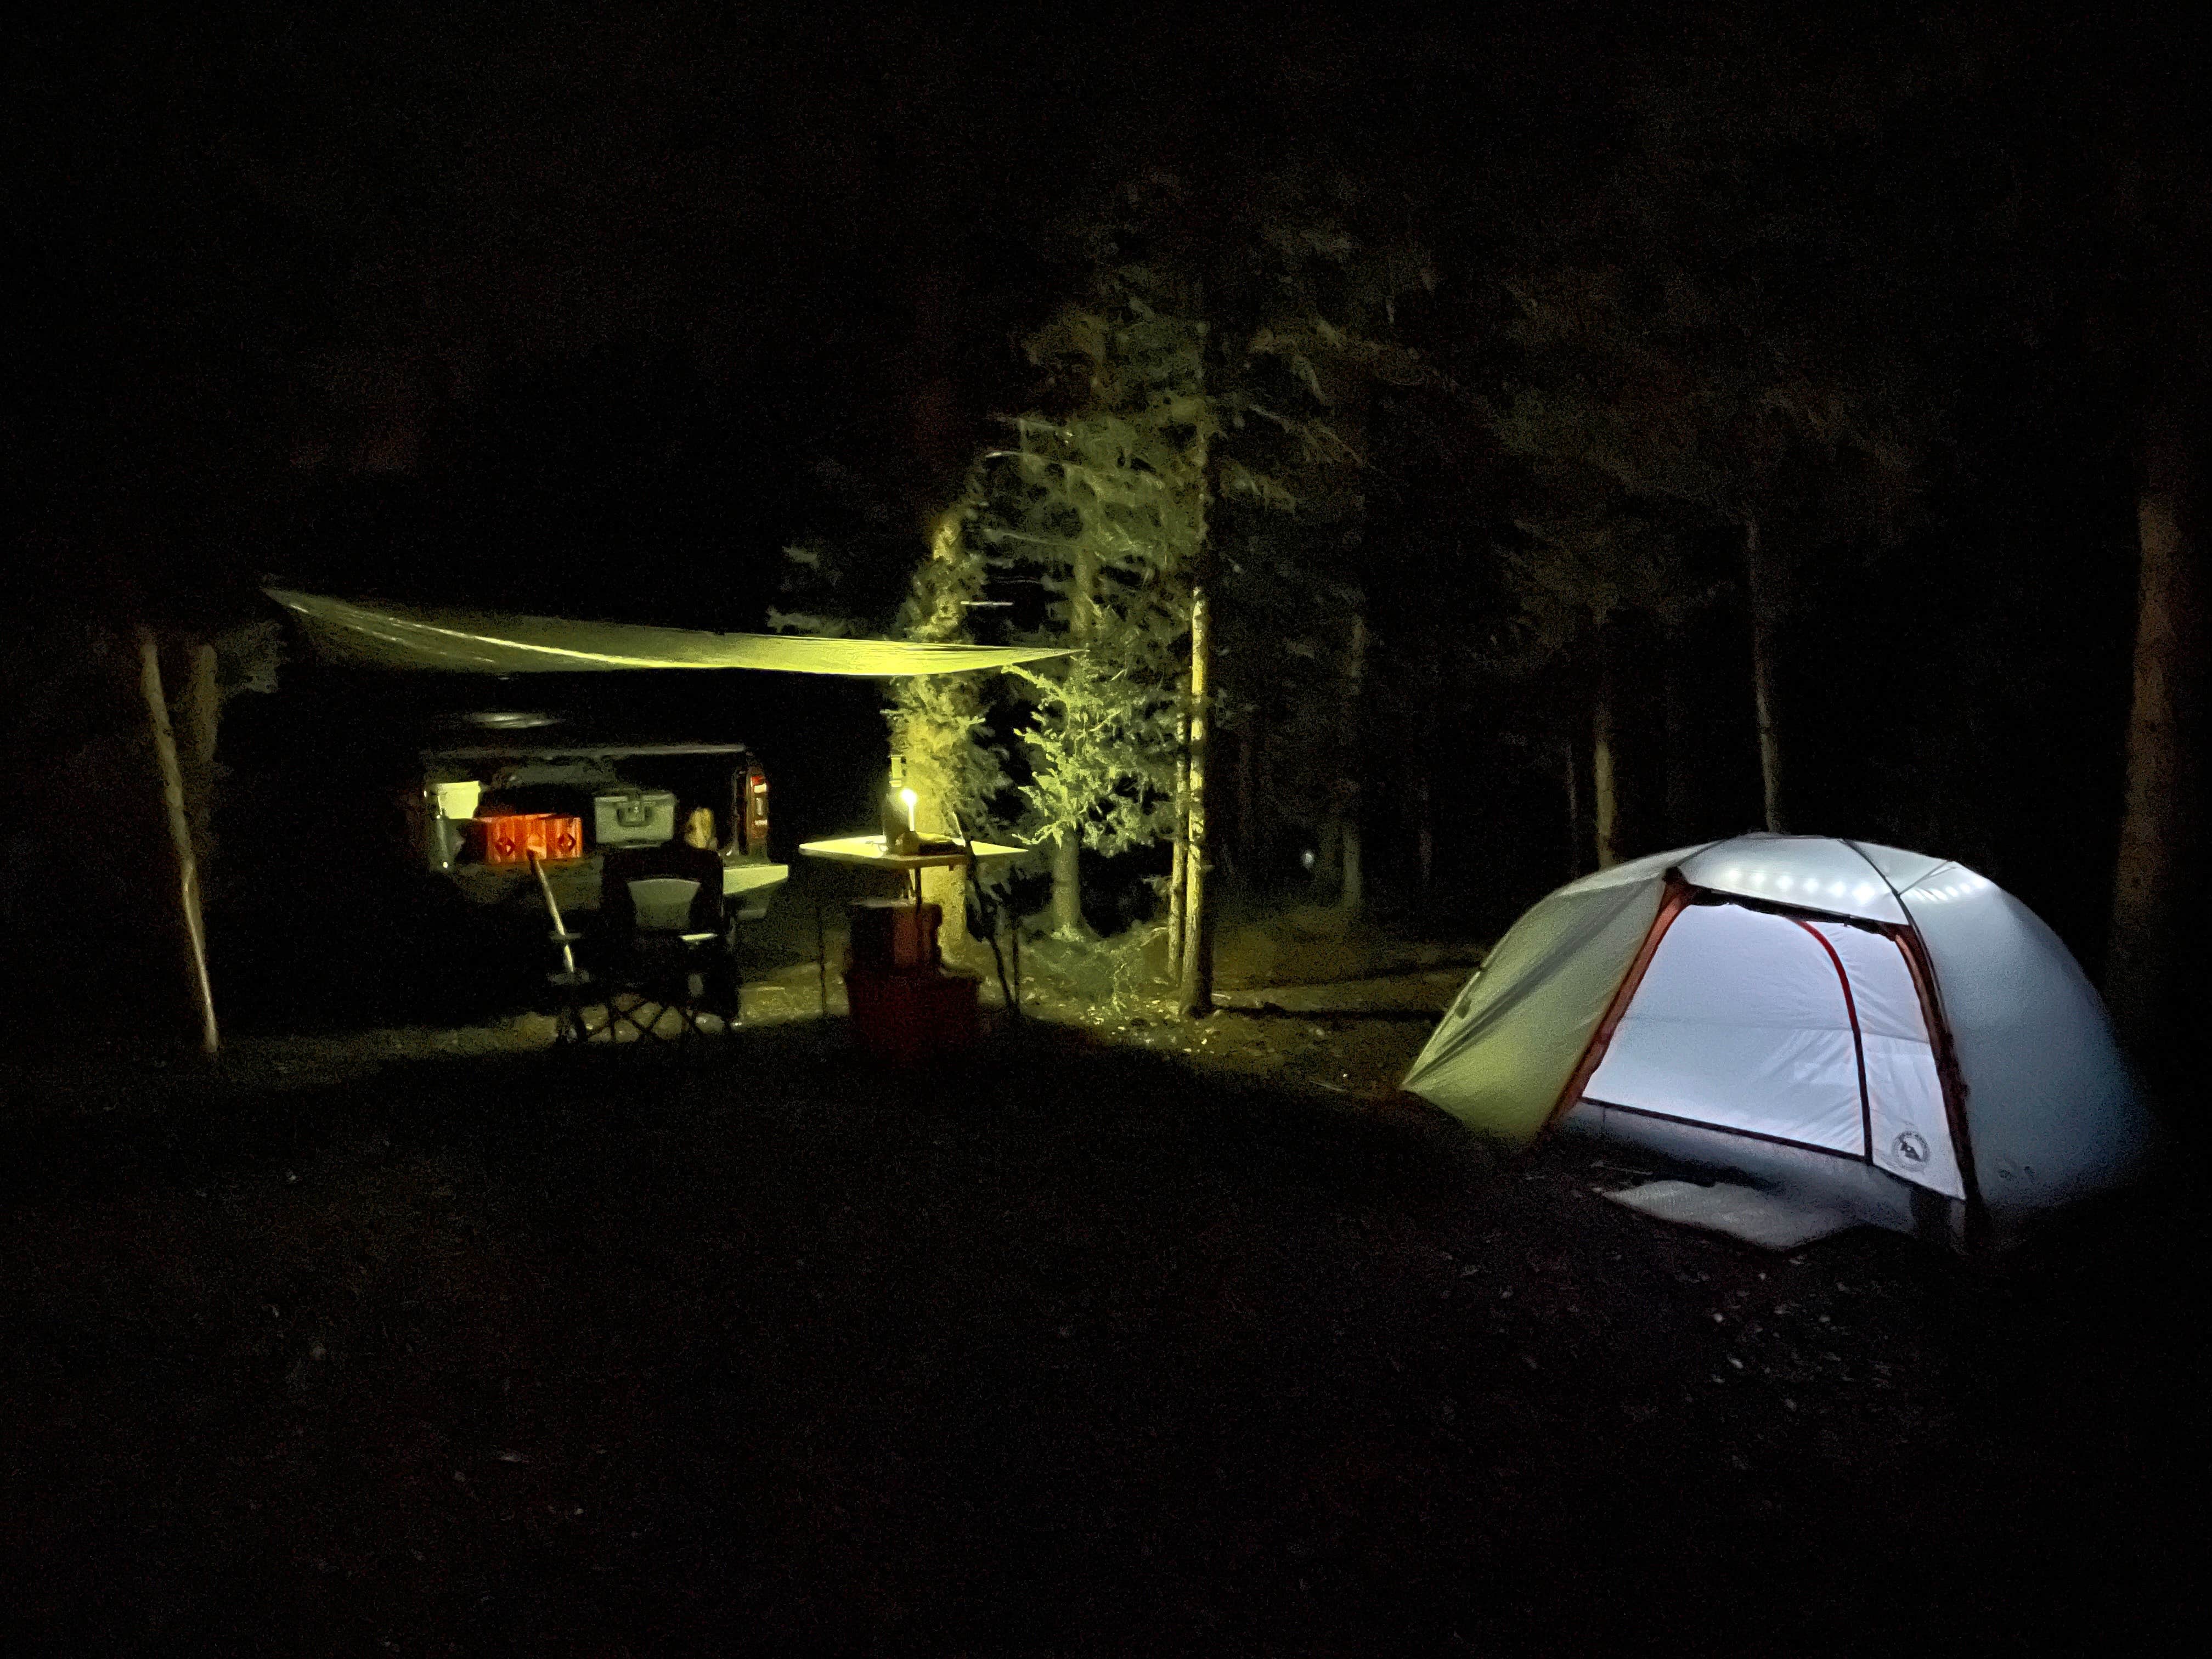 Camper submitted image from East Fork San Juan River, USFS Road 667 - Dispersed Camping - 1